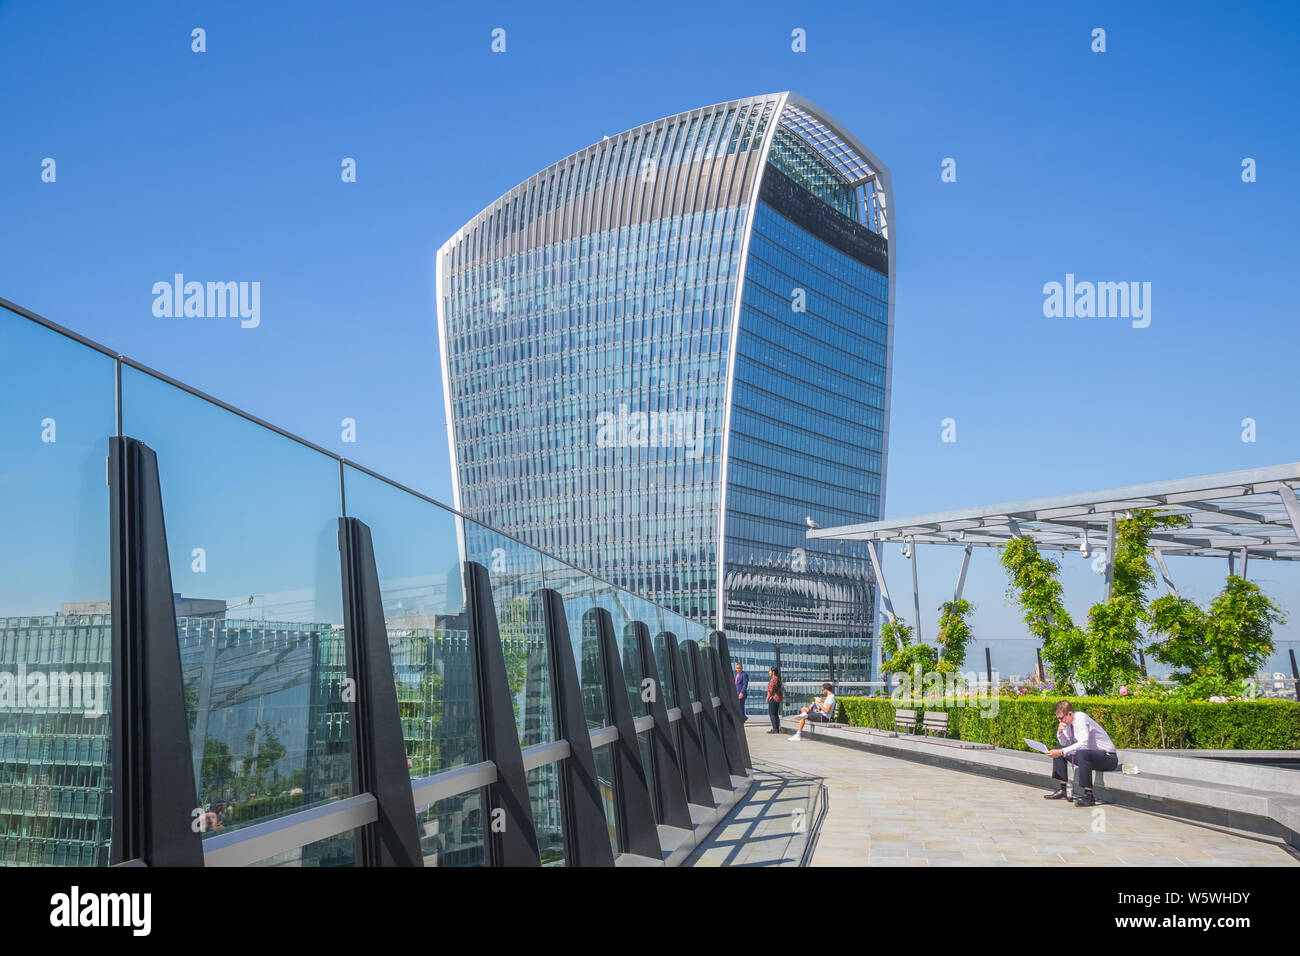 London, UK - July 16, 2019 - 20 Fenchurch Street seen from The Garden at 120, a roof garden in the city of London Stock Photo